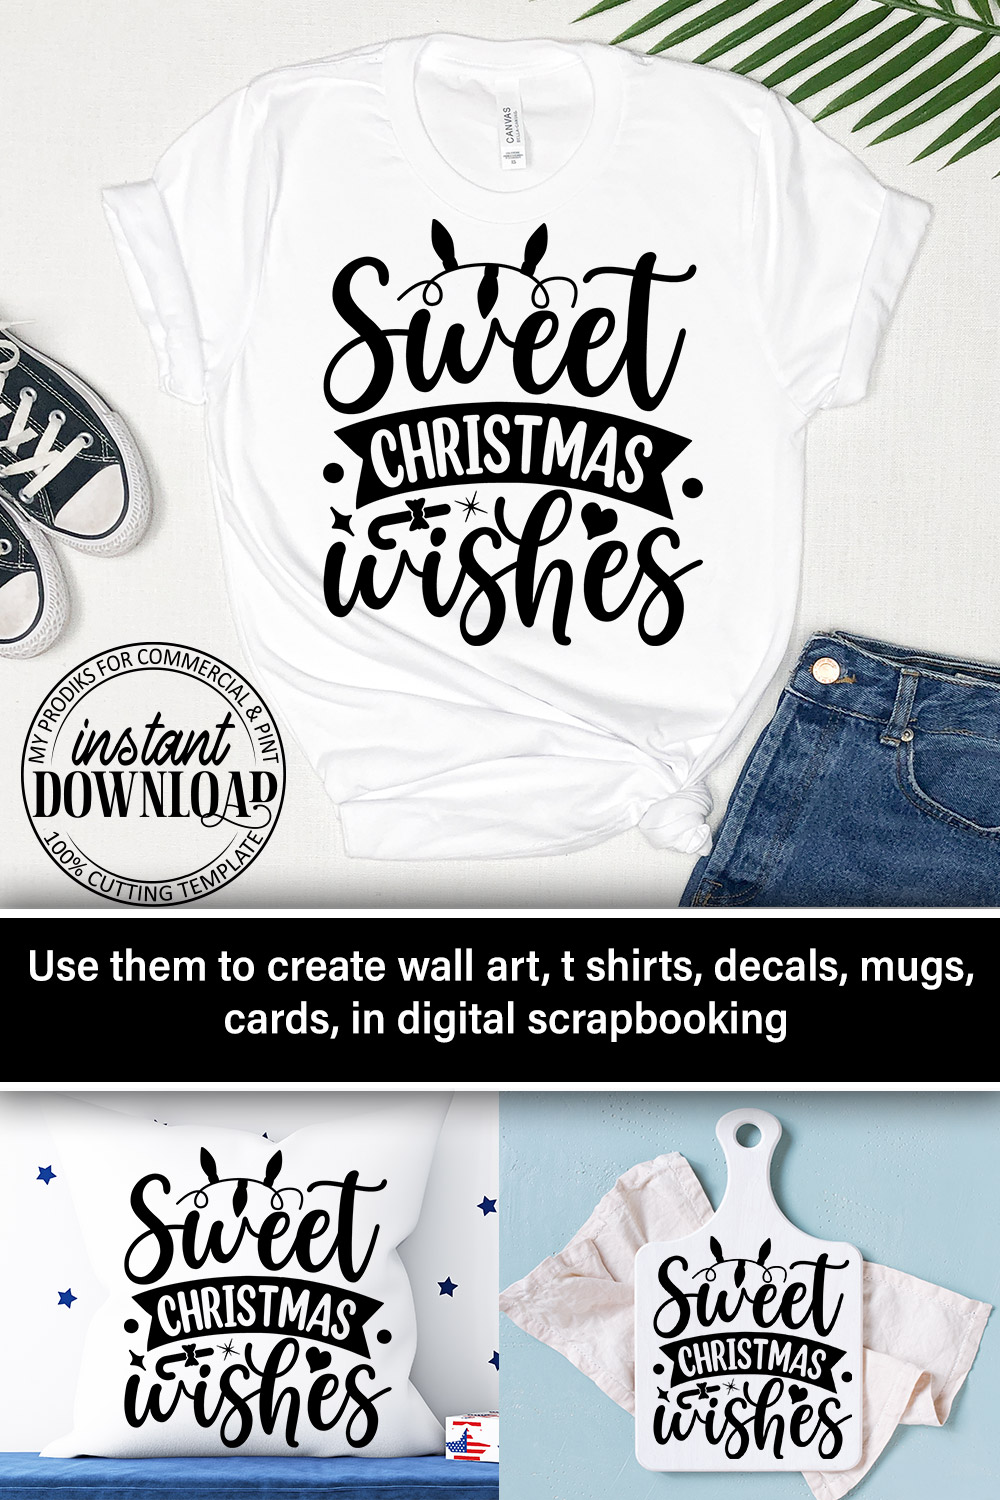 Sweet Christmas wishes pinterest preview image.